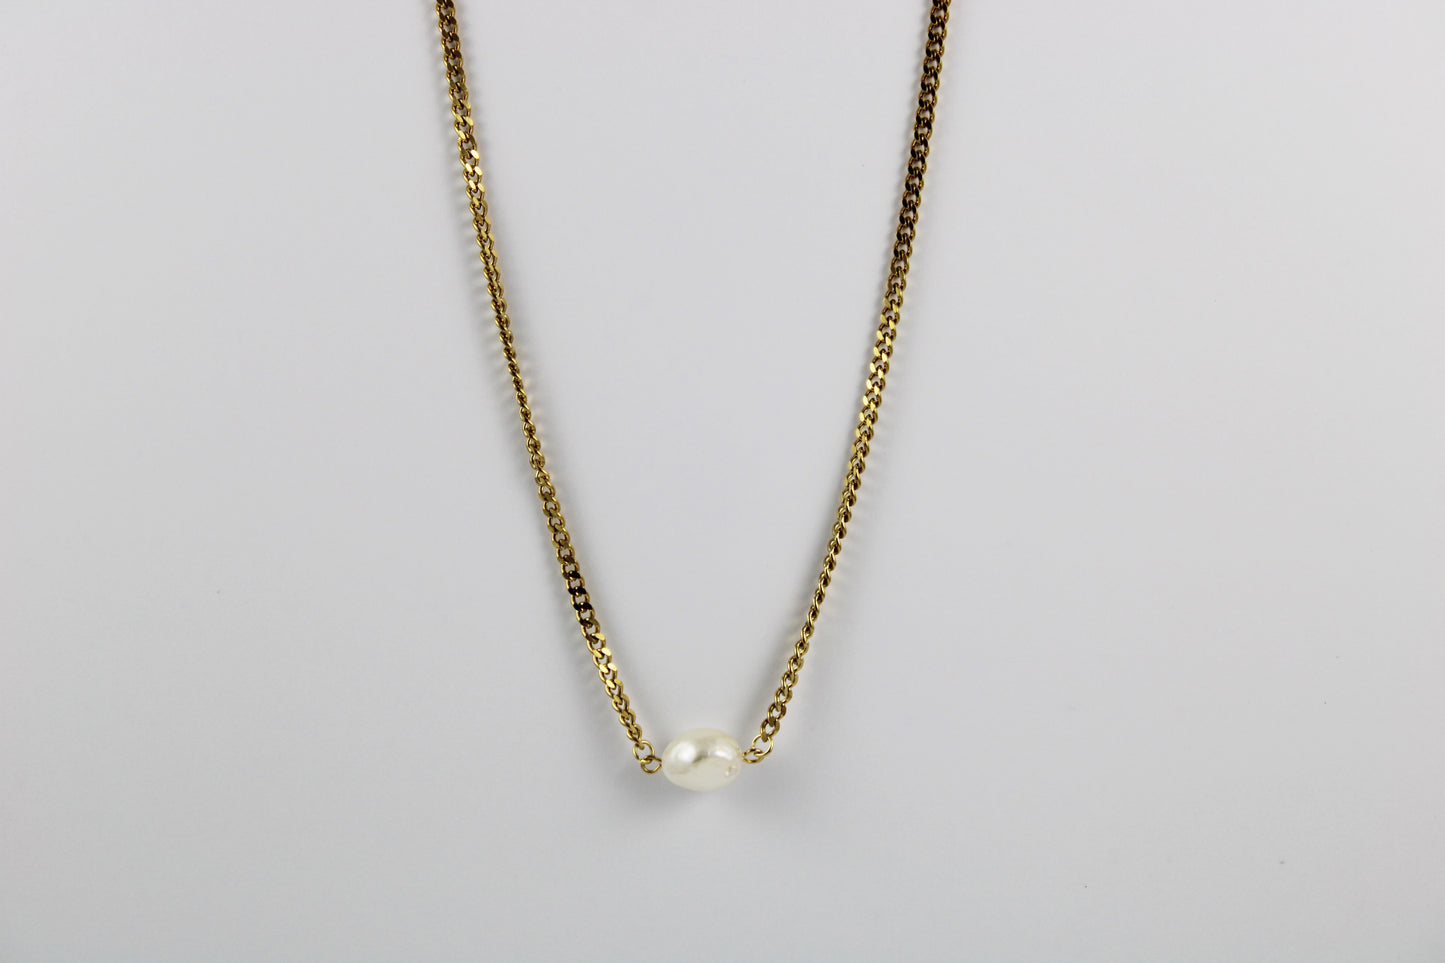 Chain necklace with pearl